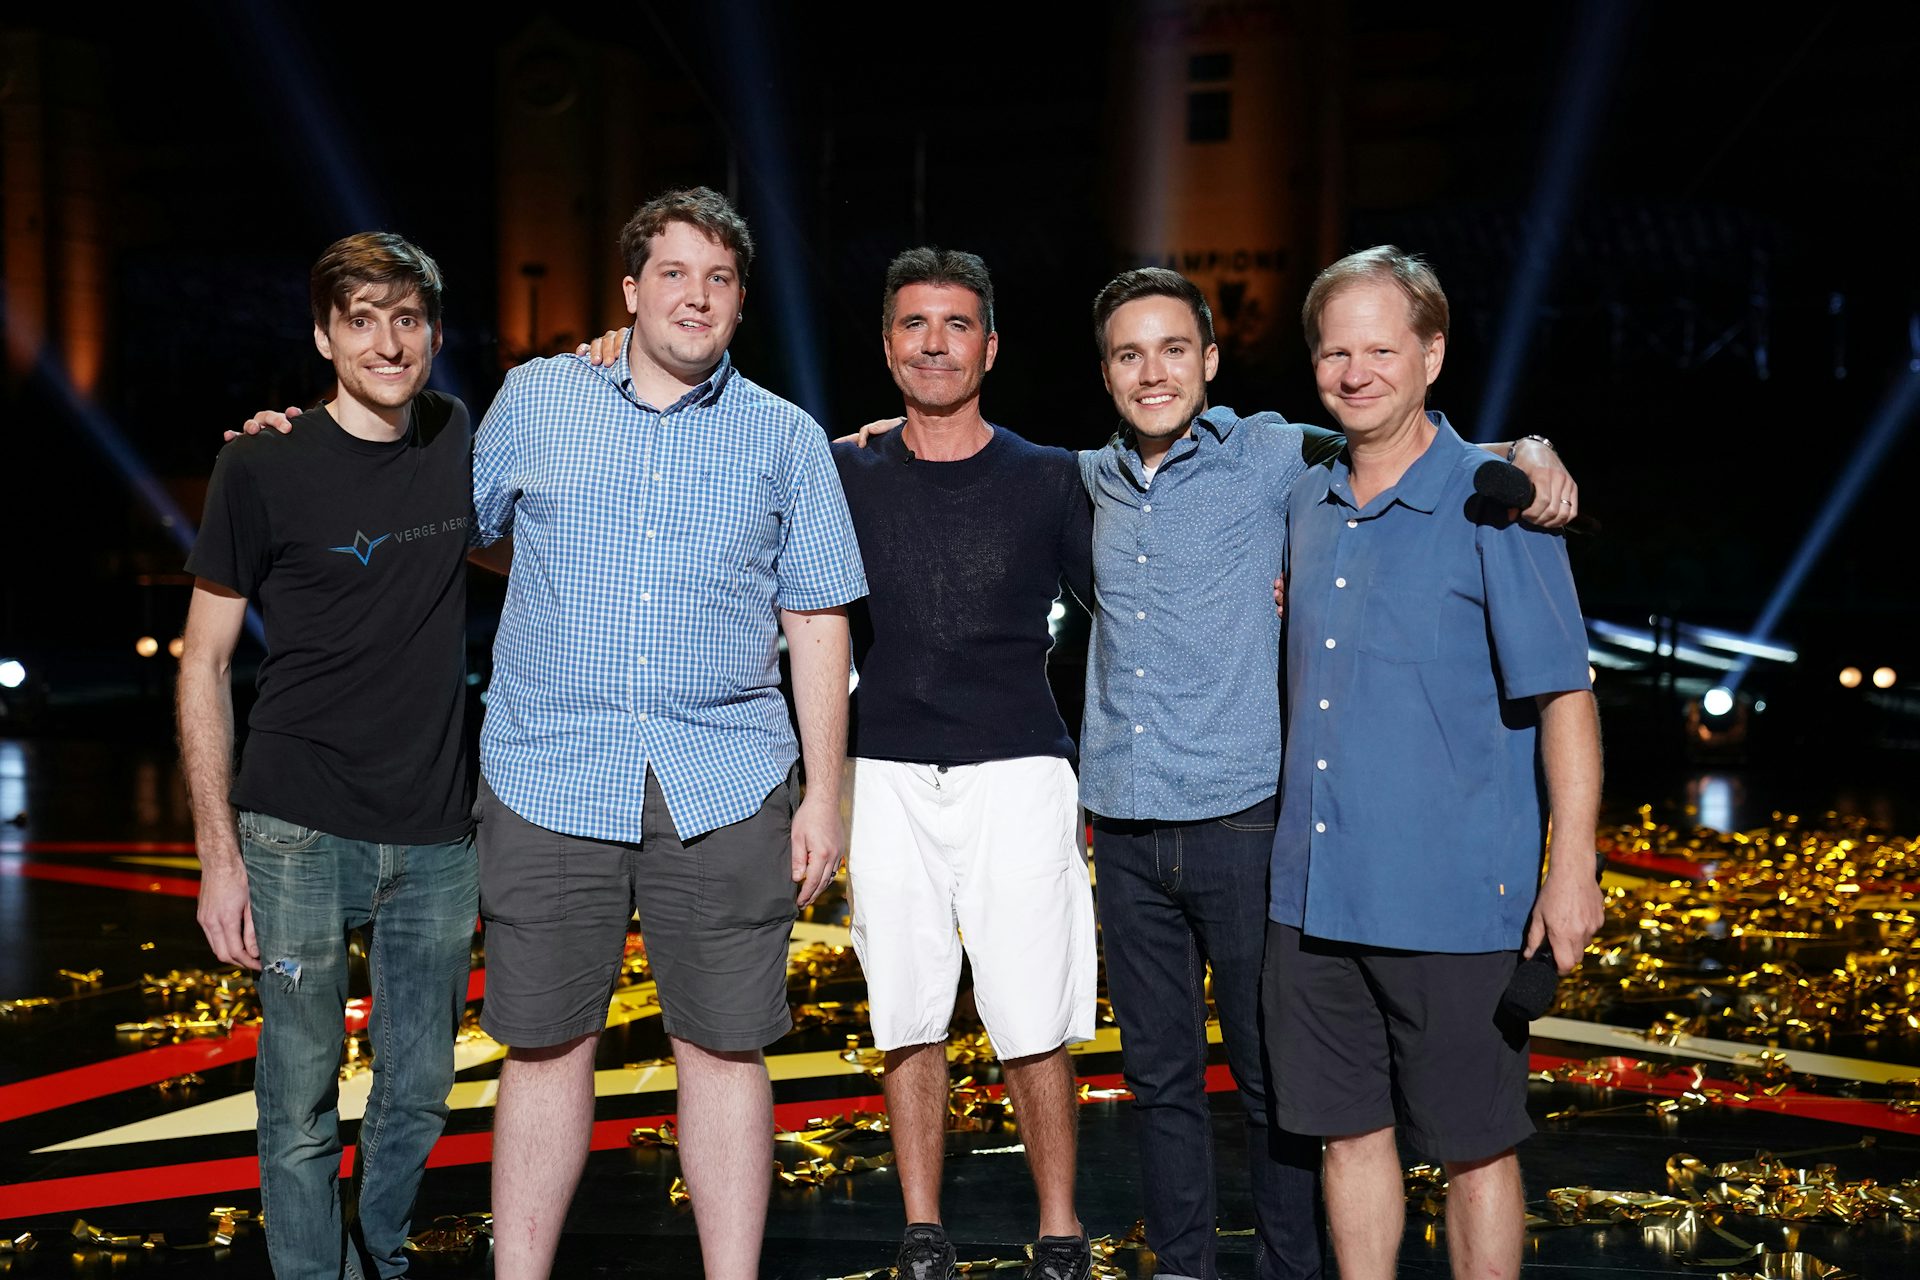 Verge Aero wins a golden buzzer from, non other than, Simon Cowell on America's Got Talent: Extreme!